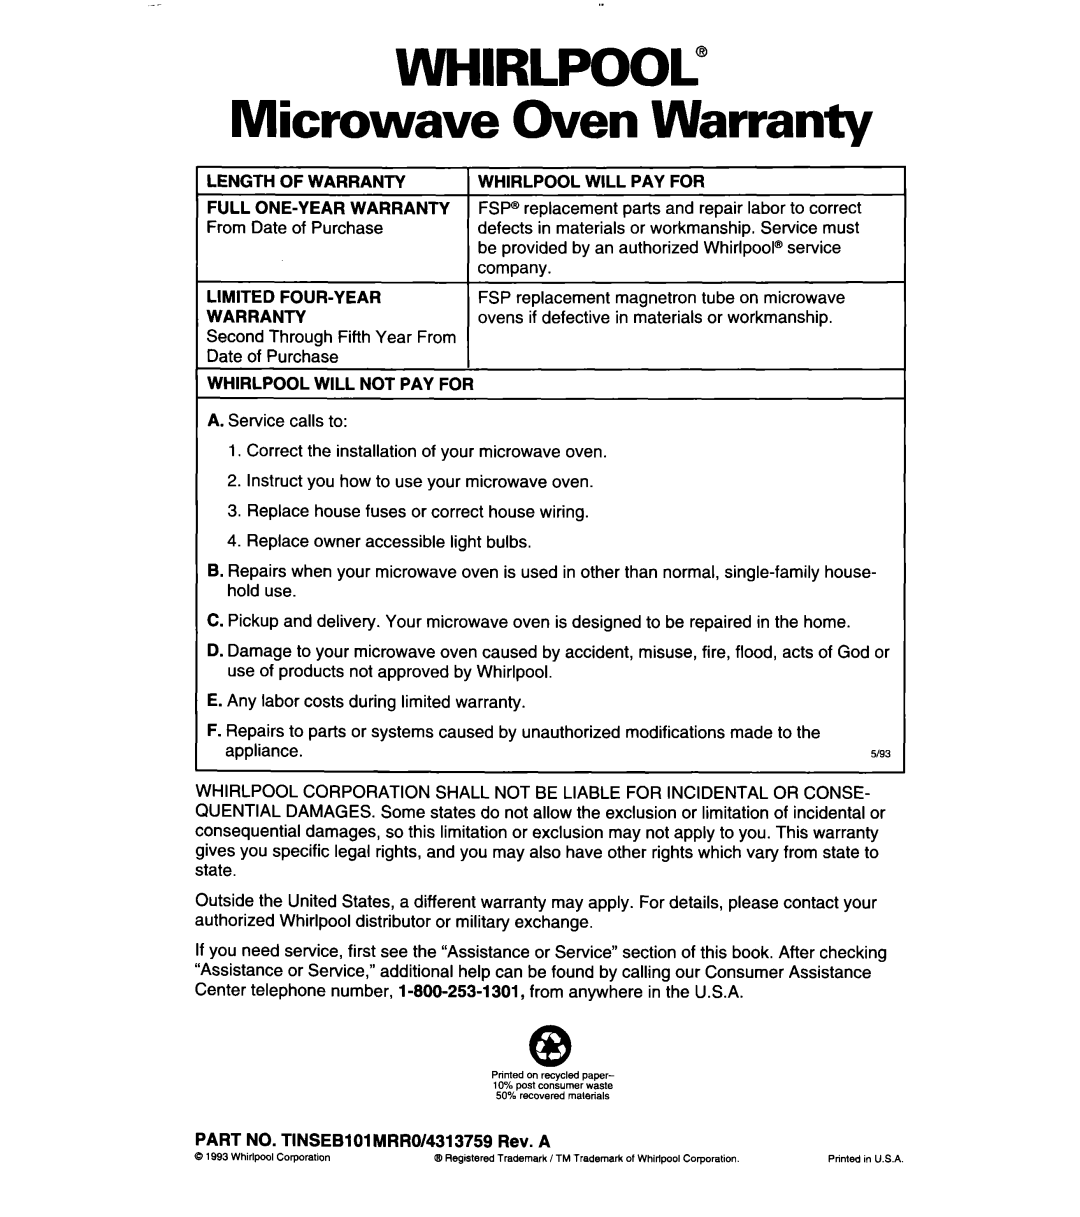 Whirlpool MT6125XBB/Q installation instructions Whirlpool”, Microwave Oven Warranty 